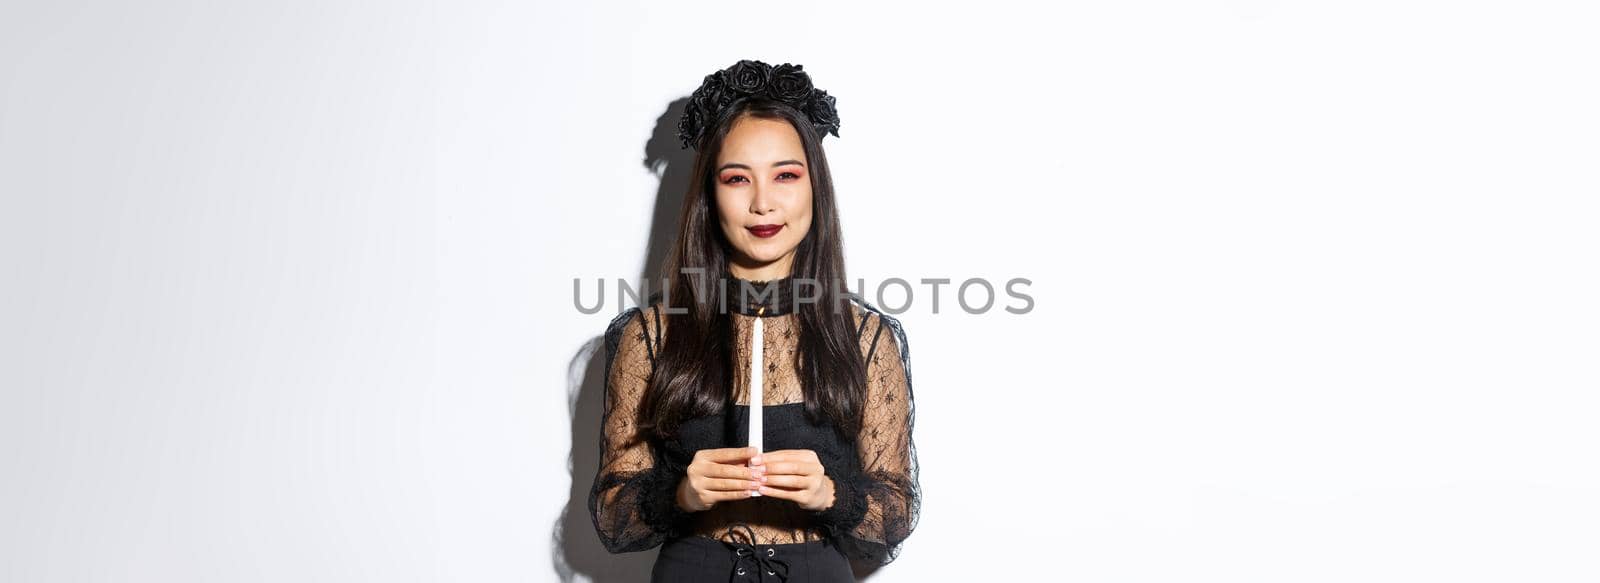 Image of beautiful woman celebrating halloween in witch costume, holding candle and squinting at camera suspicious, standing over white background.